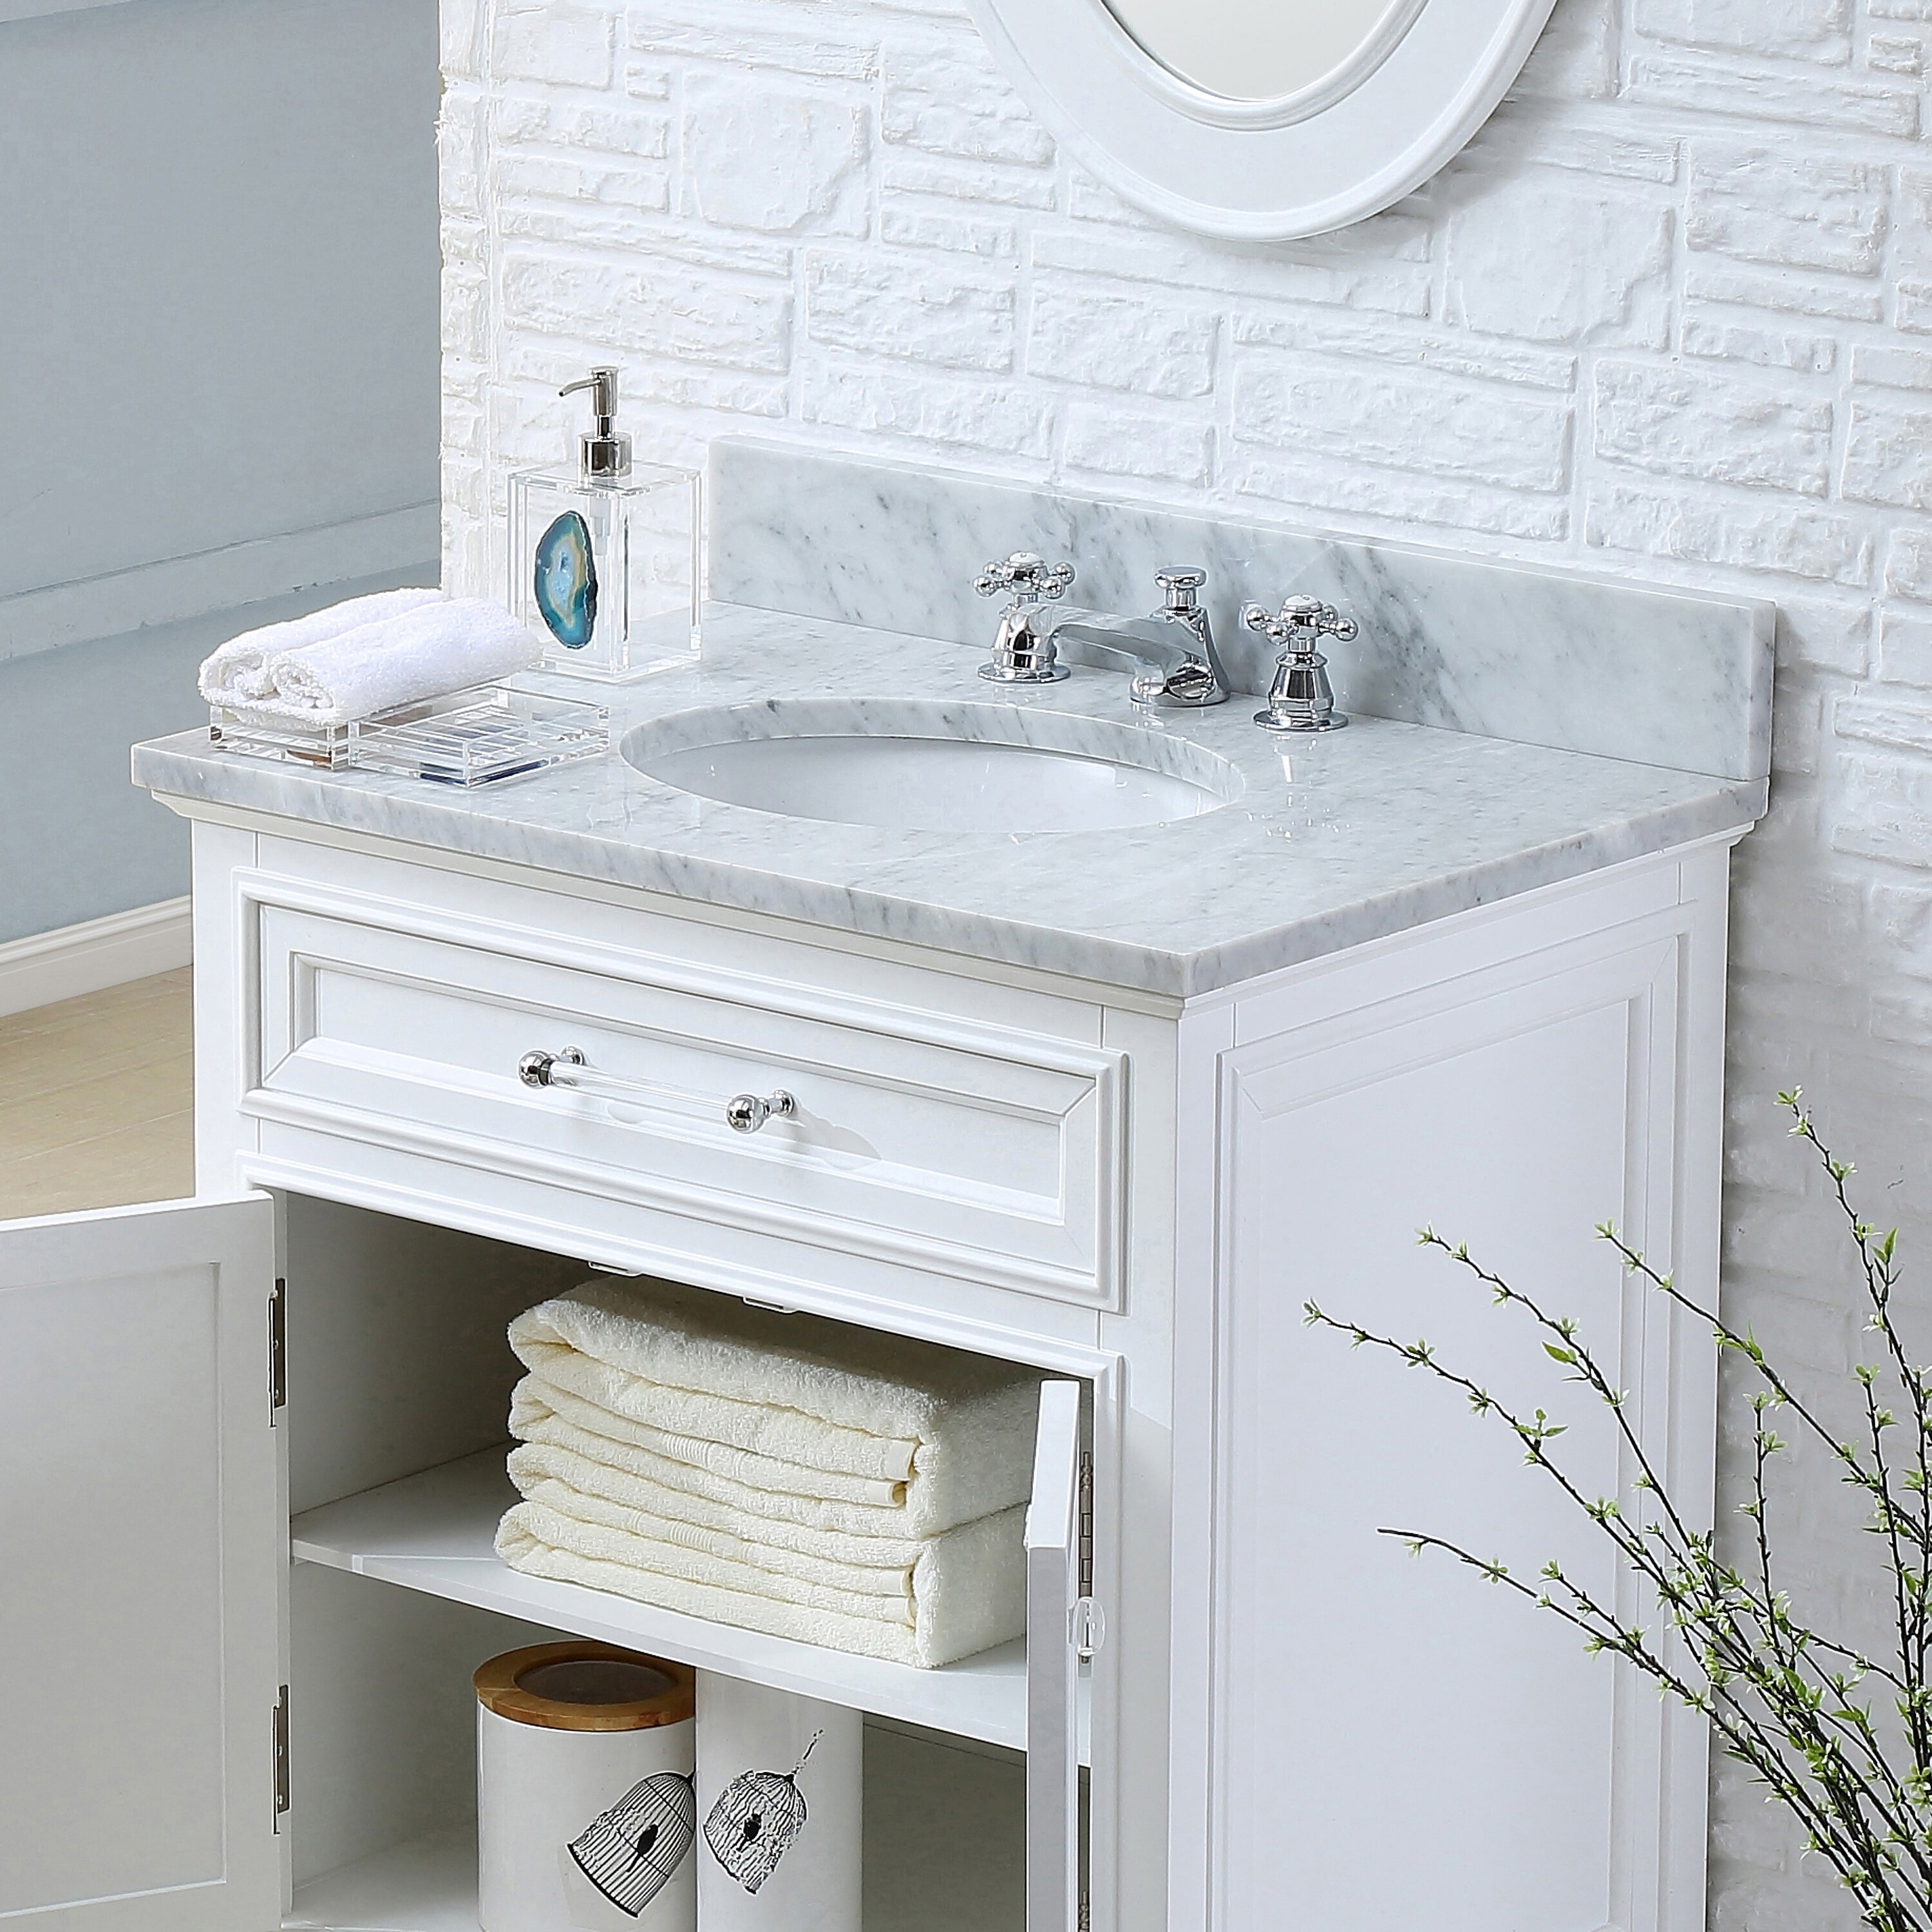 Darby Home Co Colchester 30 Single Sink Bathroom Vanity Set White